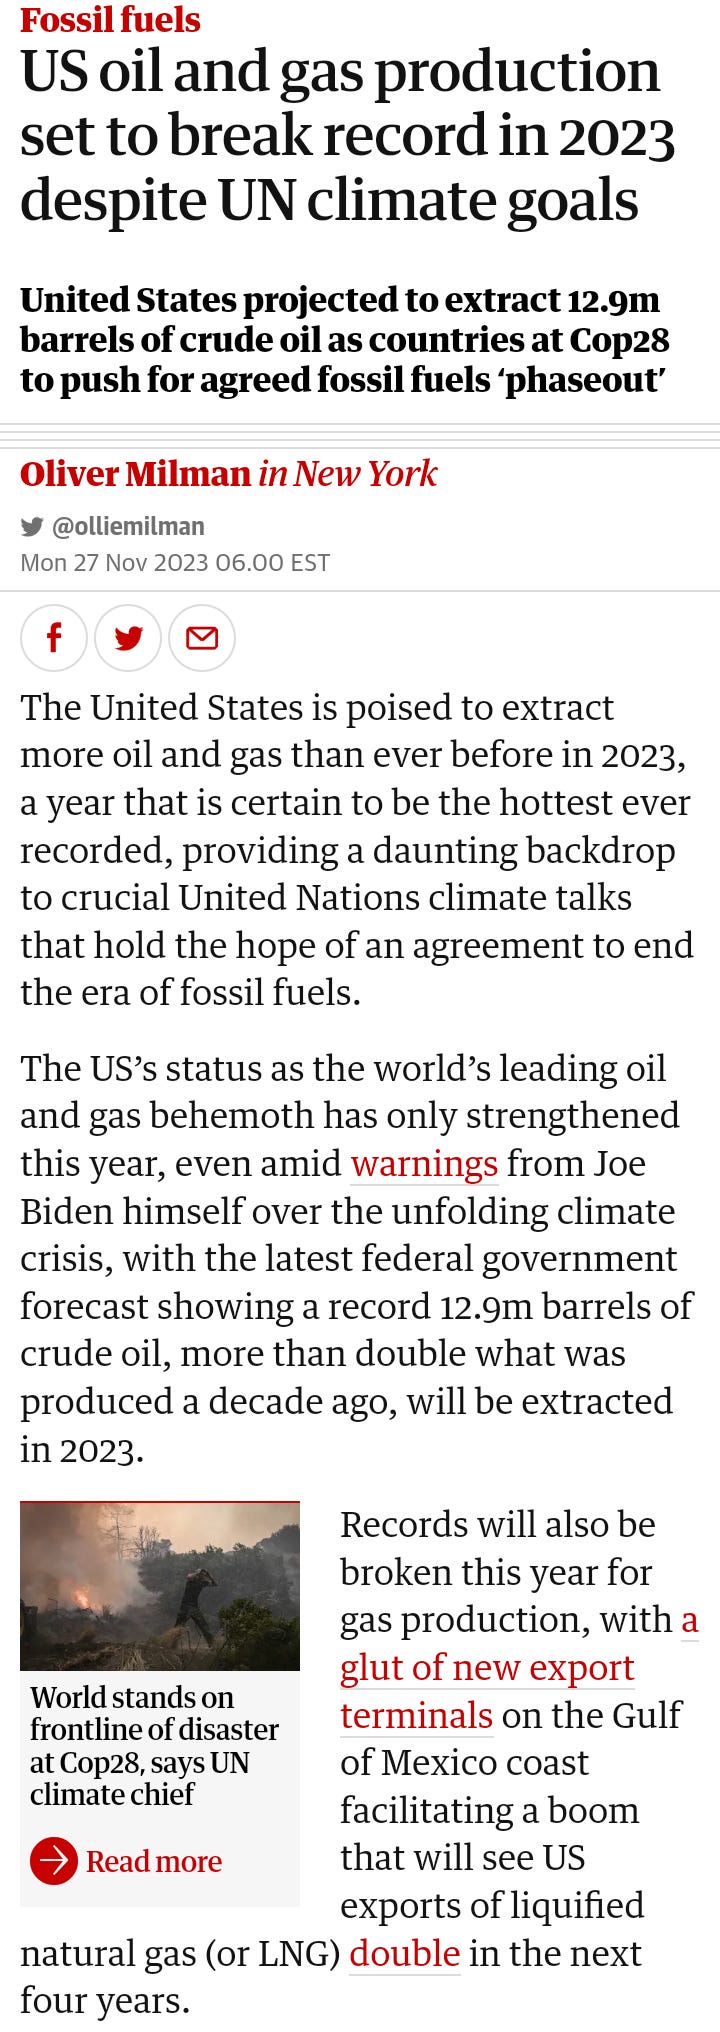 Guardian article "US oil and gas production set to break record in 2023"